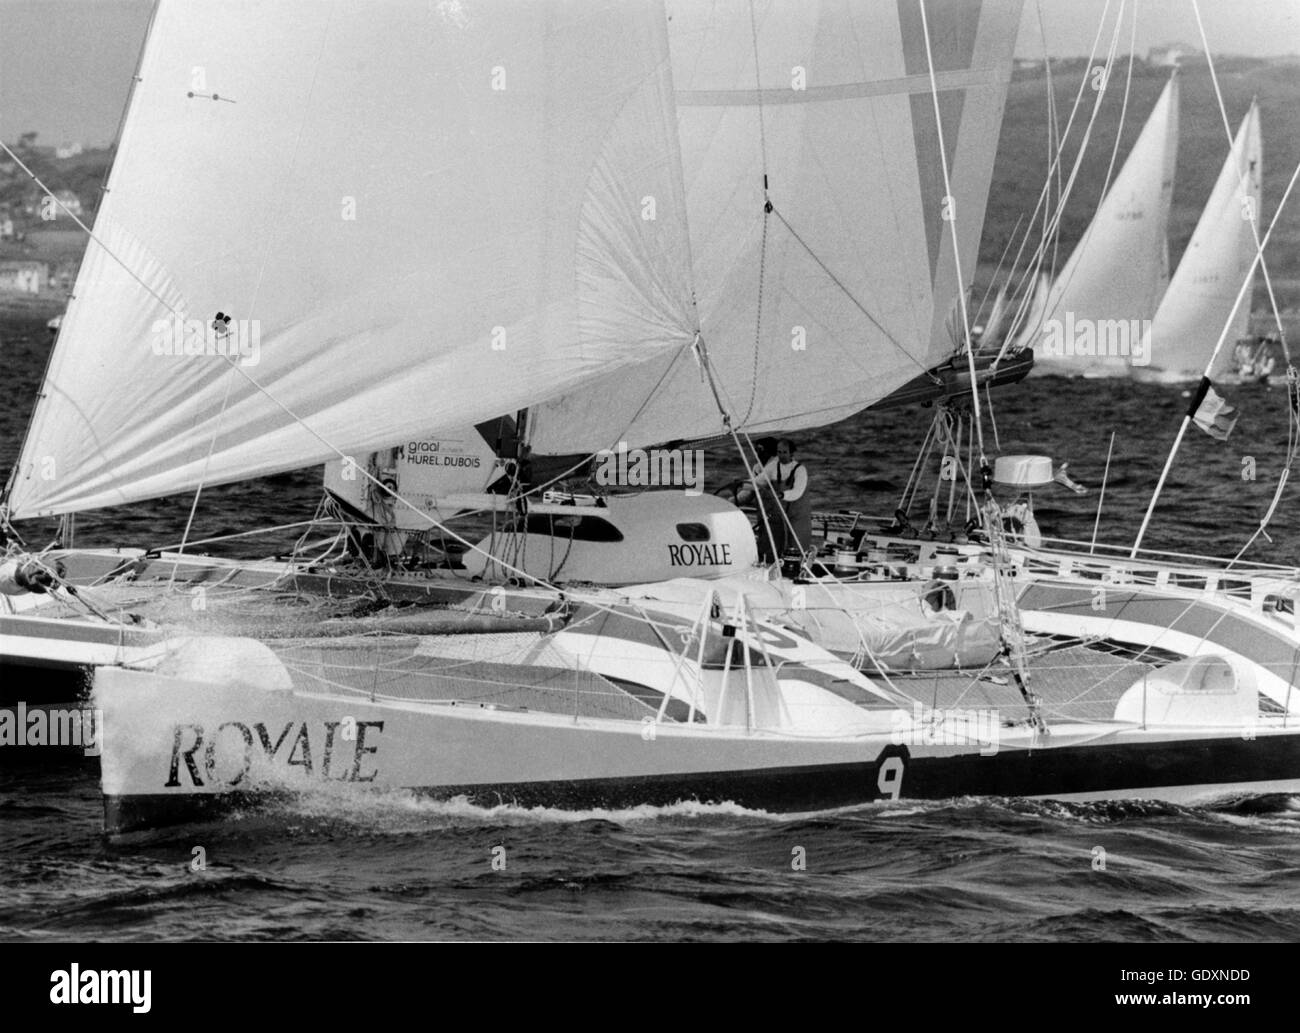 AJAX NEWS PHOTOS. 8TH JUNE 1986. PLYMOUTH, ENGLAND - LOIC CARADEC OF LA TRINITE FRANCE, SKIPPER OF THE LARGEST ENTRY IN THIS YEAR'S TWO-STAR TRANSATLANTIC RACE WHICH BEGAN TODAY. THE 85 FT ROYALE LEAD A FIELD OF 49 STARTERS OUT OF PLYMOUTH SOUND. OLIVIER DESPAGNE IS CARADEC'S CREW. PHOTO:JONATHAN ESTLAND/AJAX REF:HDD/WPX/2 STAR 86 Stock Photo